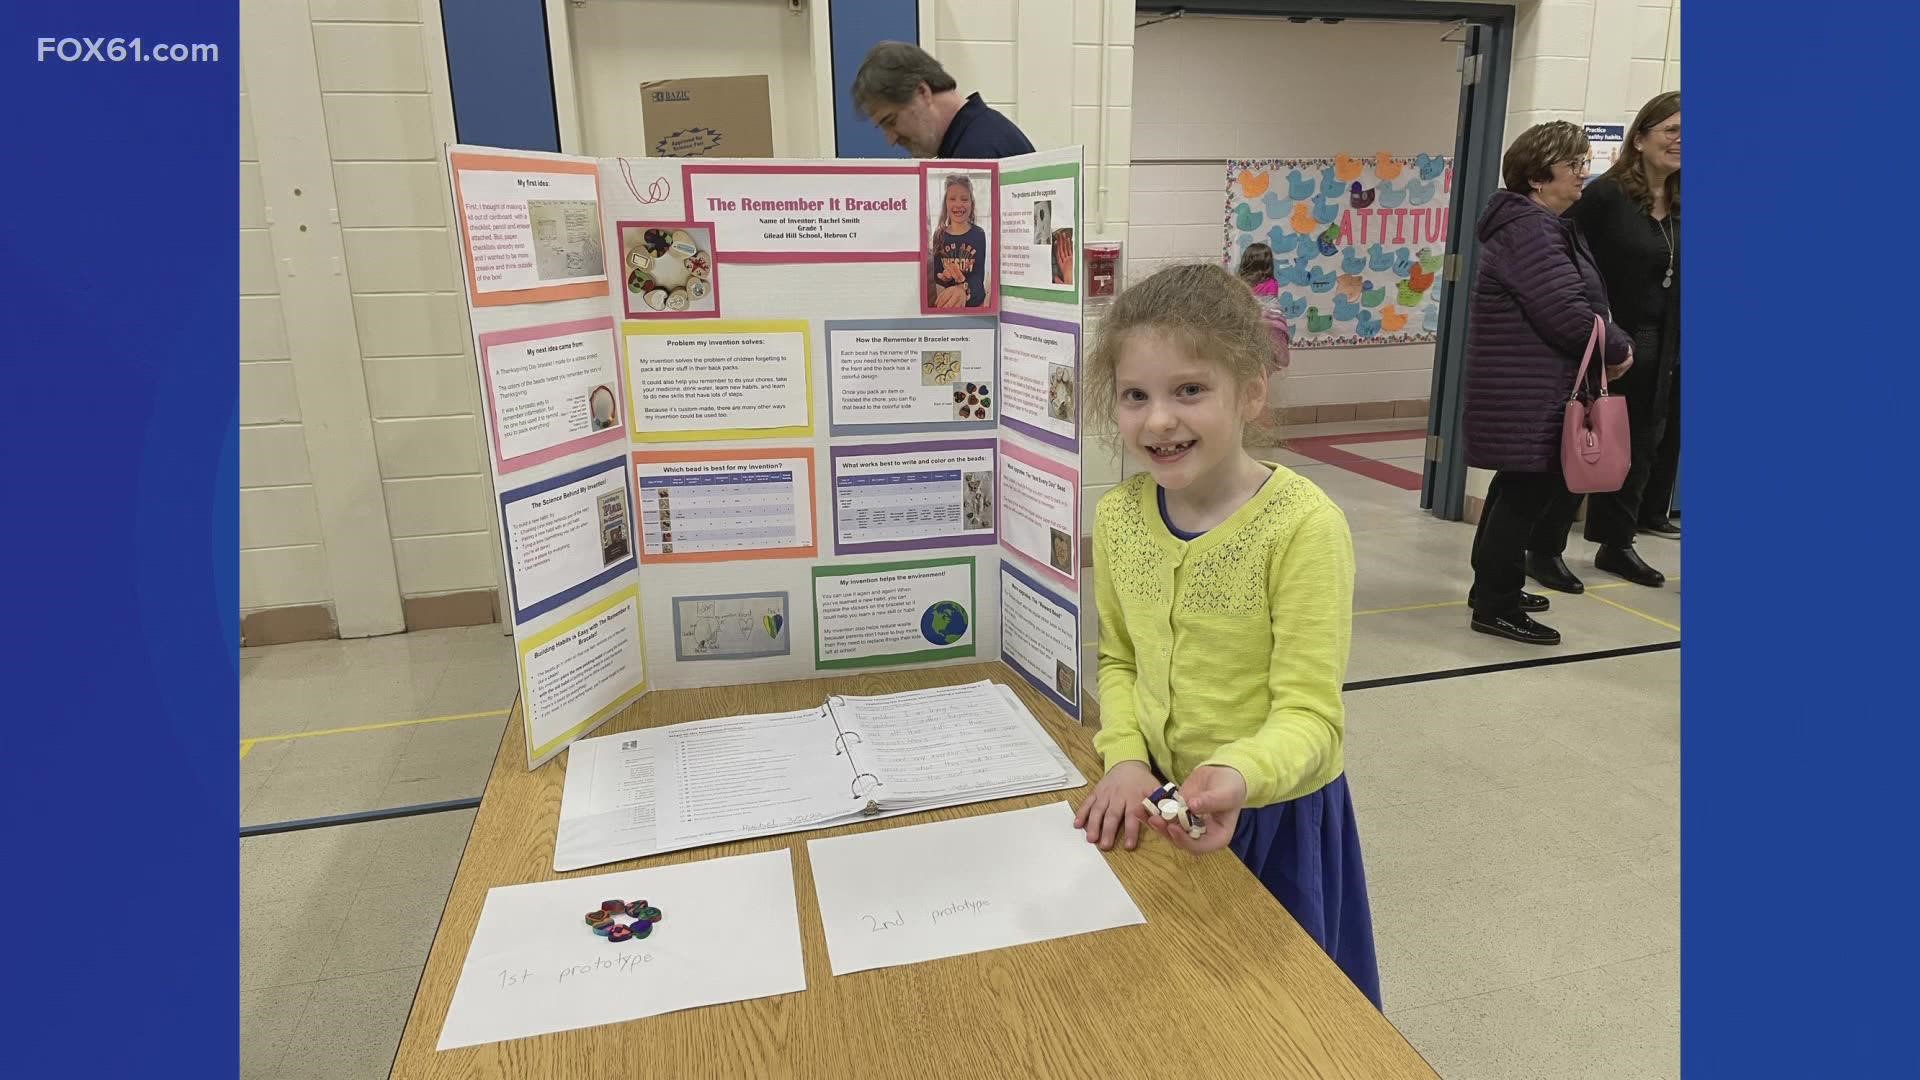 Rachel Smith showed us the invention she created that won the Most Innovative Award at the Invention Convention global competition.